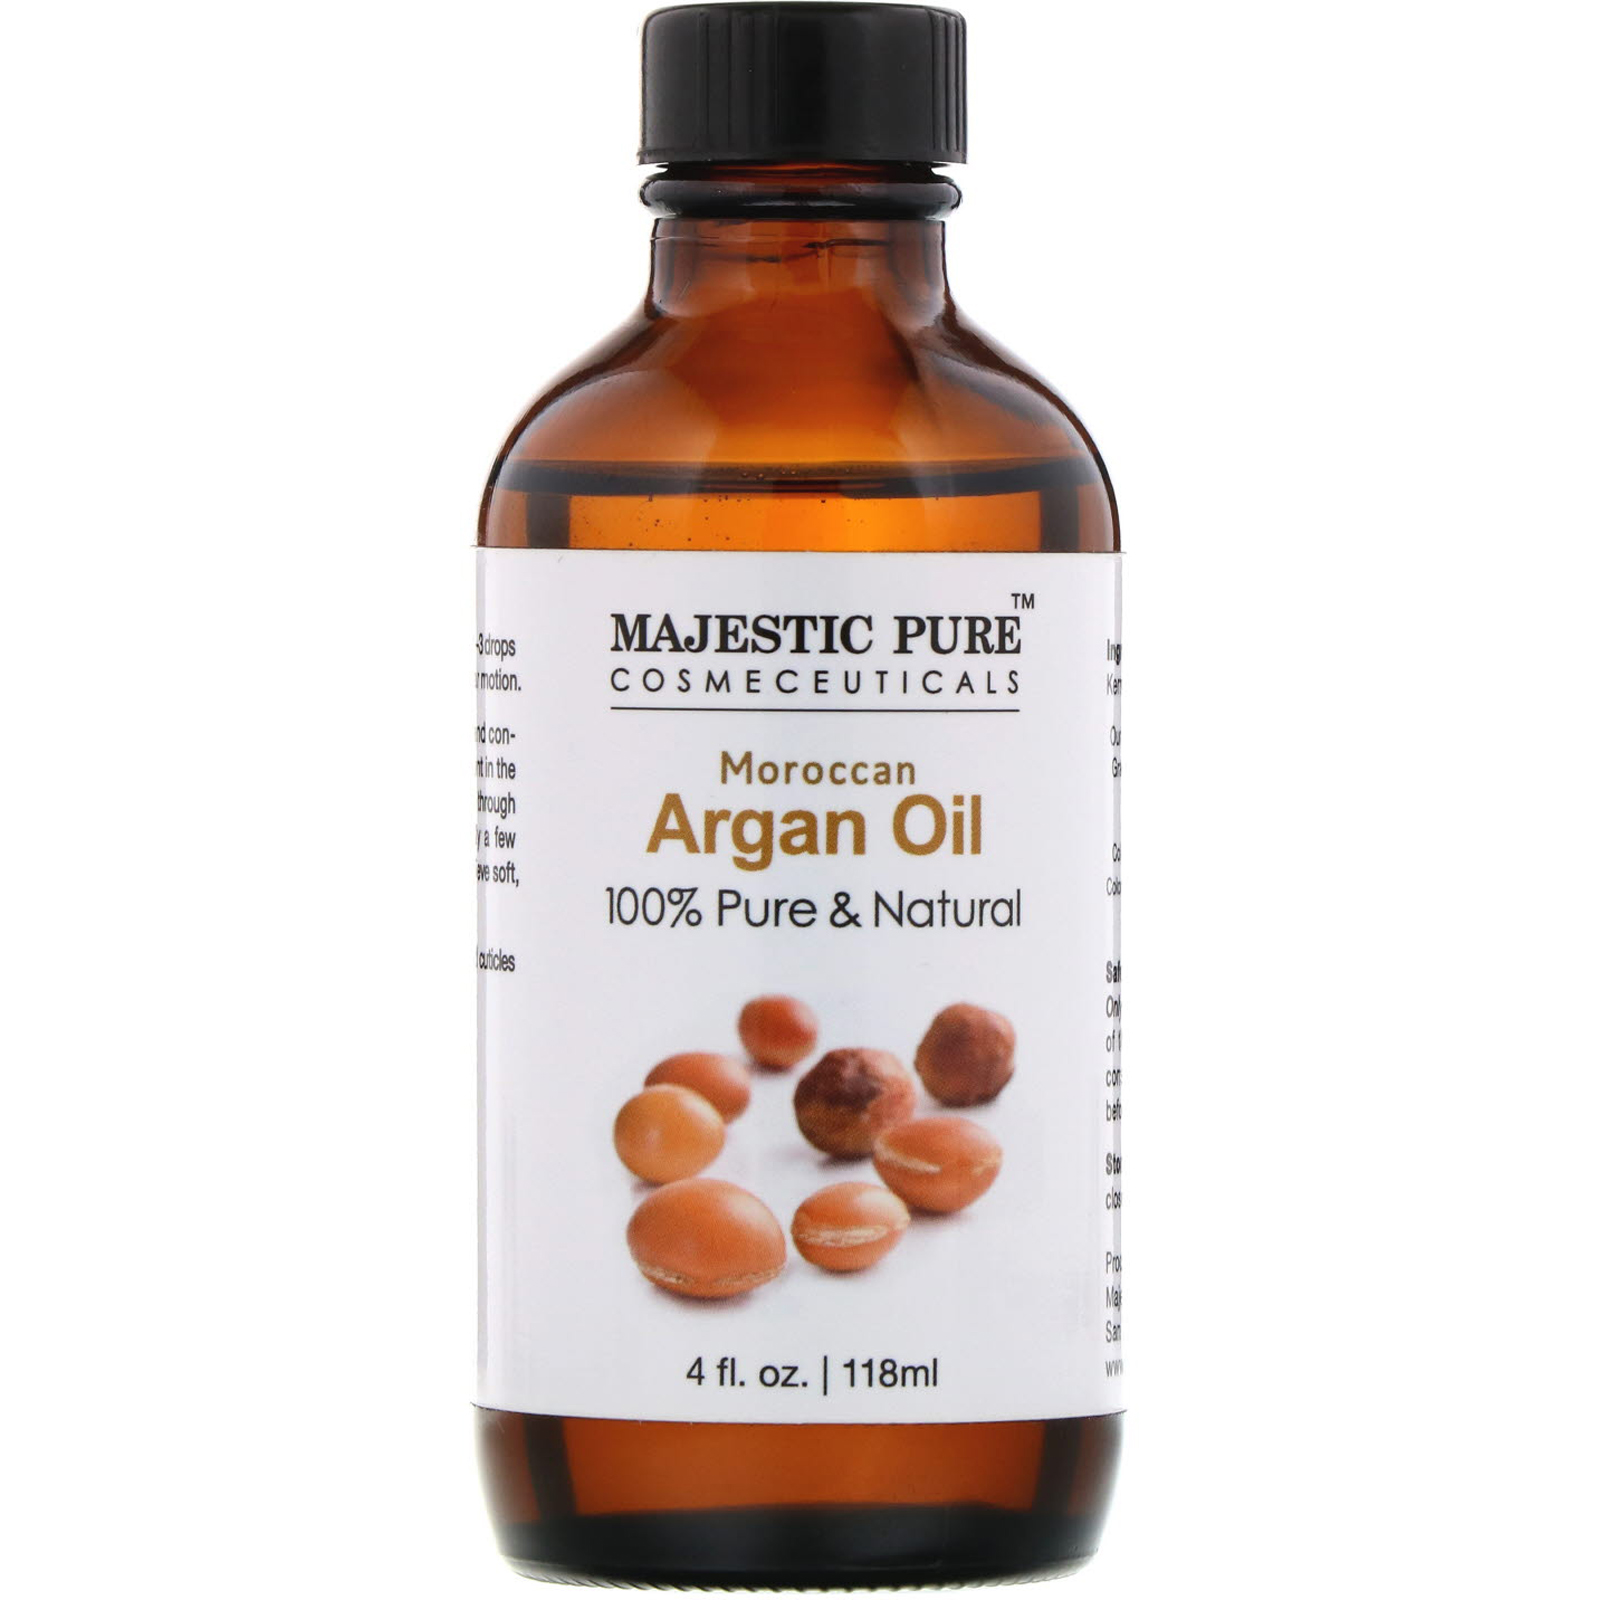 Moroccan Argan Oil for Hair and Skin From Majestic Pure